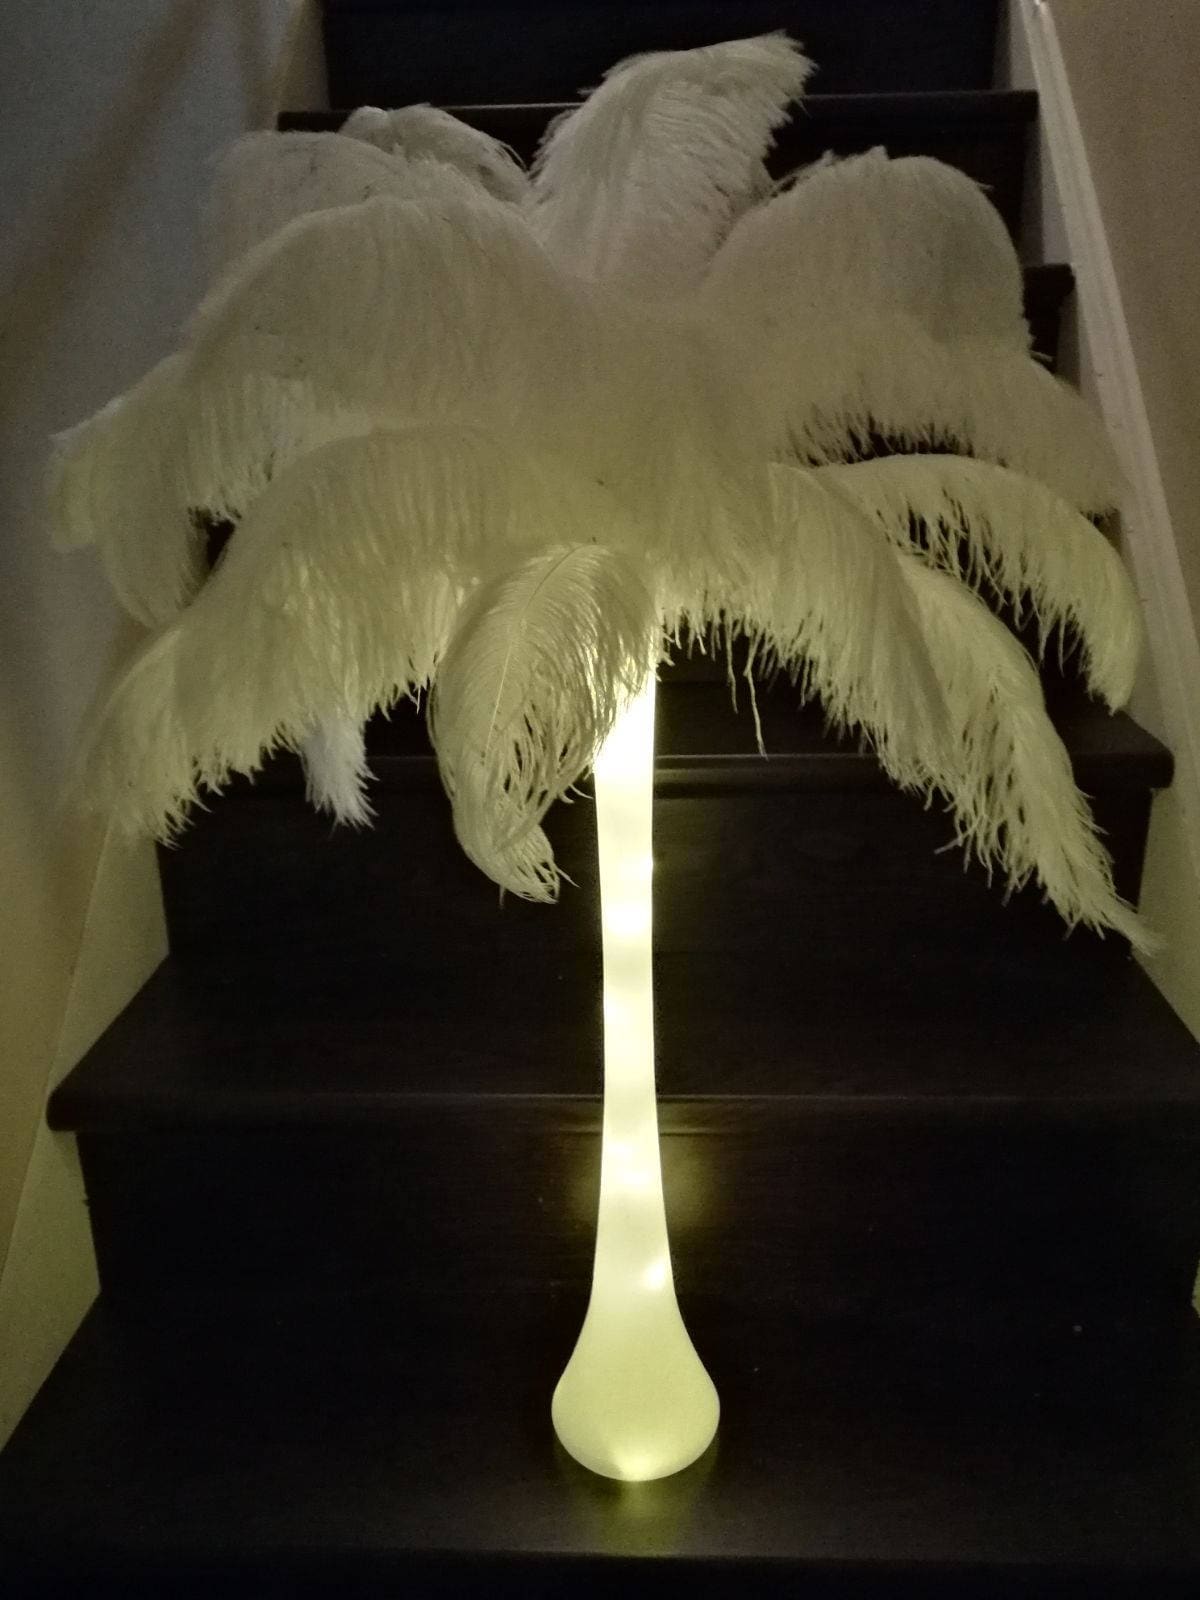 Lampu Ostrich Feathers 6-8inch Light Yellow Ostrich Feathers Plume for Wedding Centerpieces Home Vase Decoration per Pack of 10 